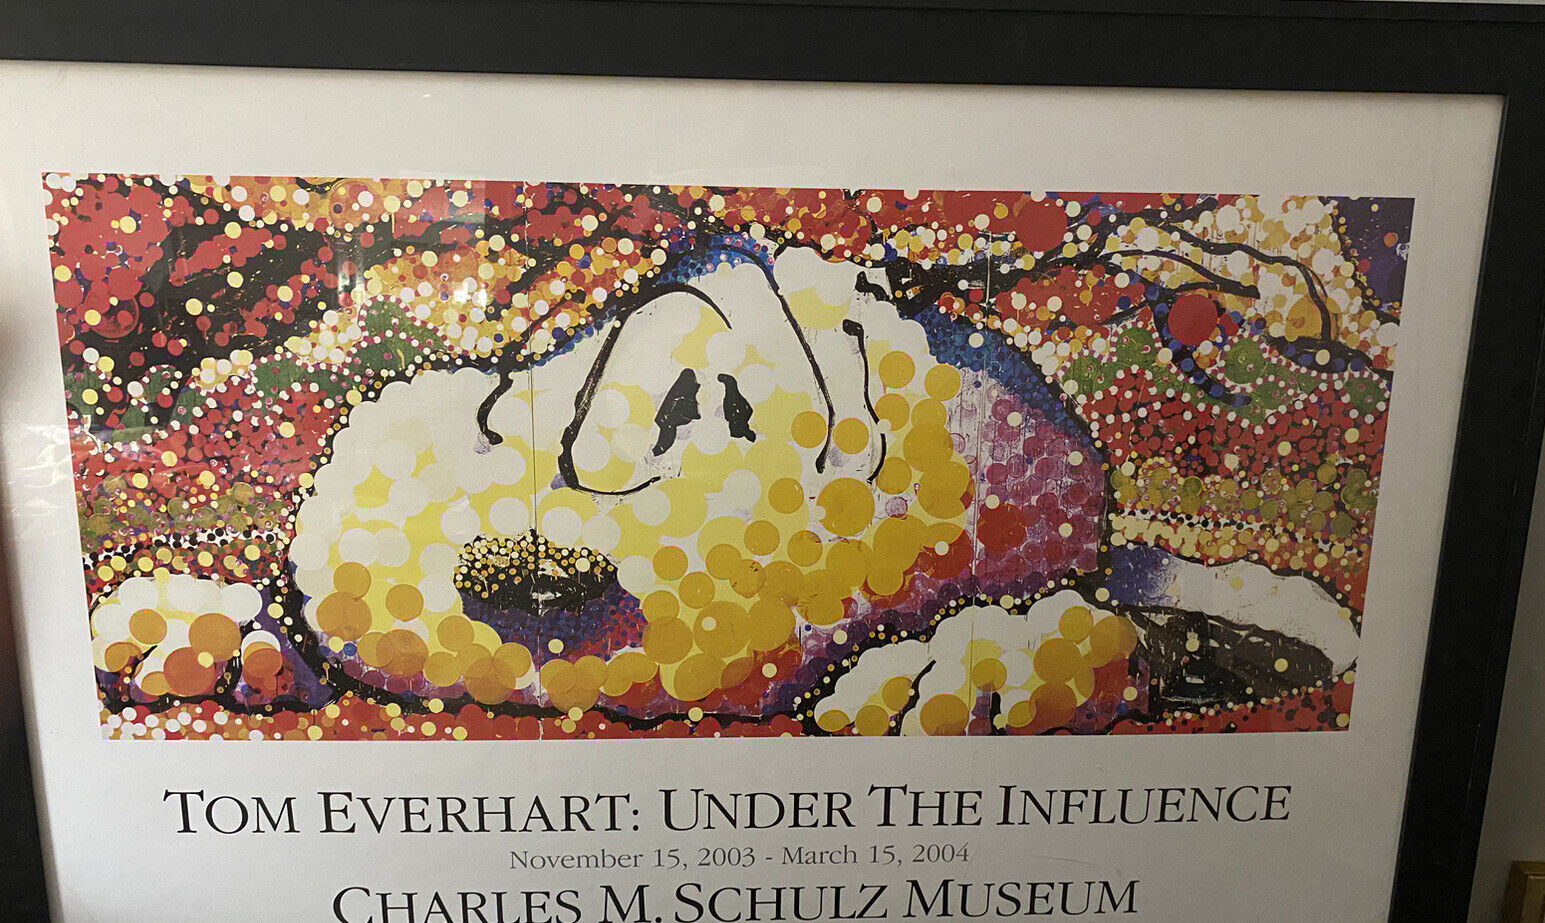 tom everhart snoopy Under The Influence